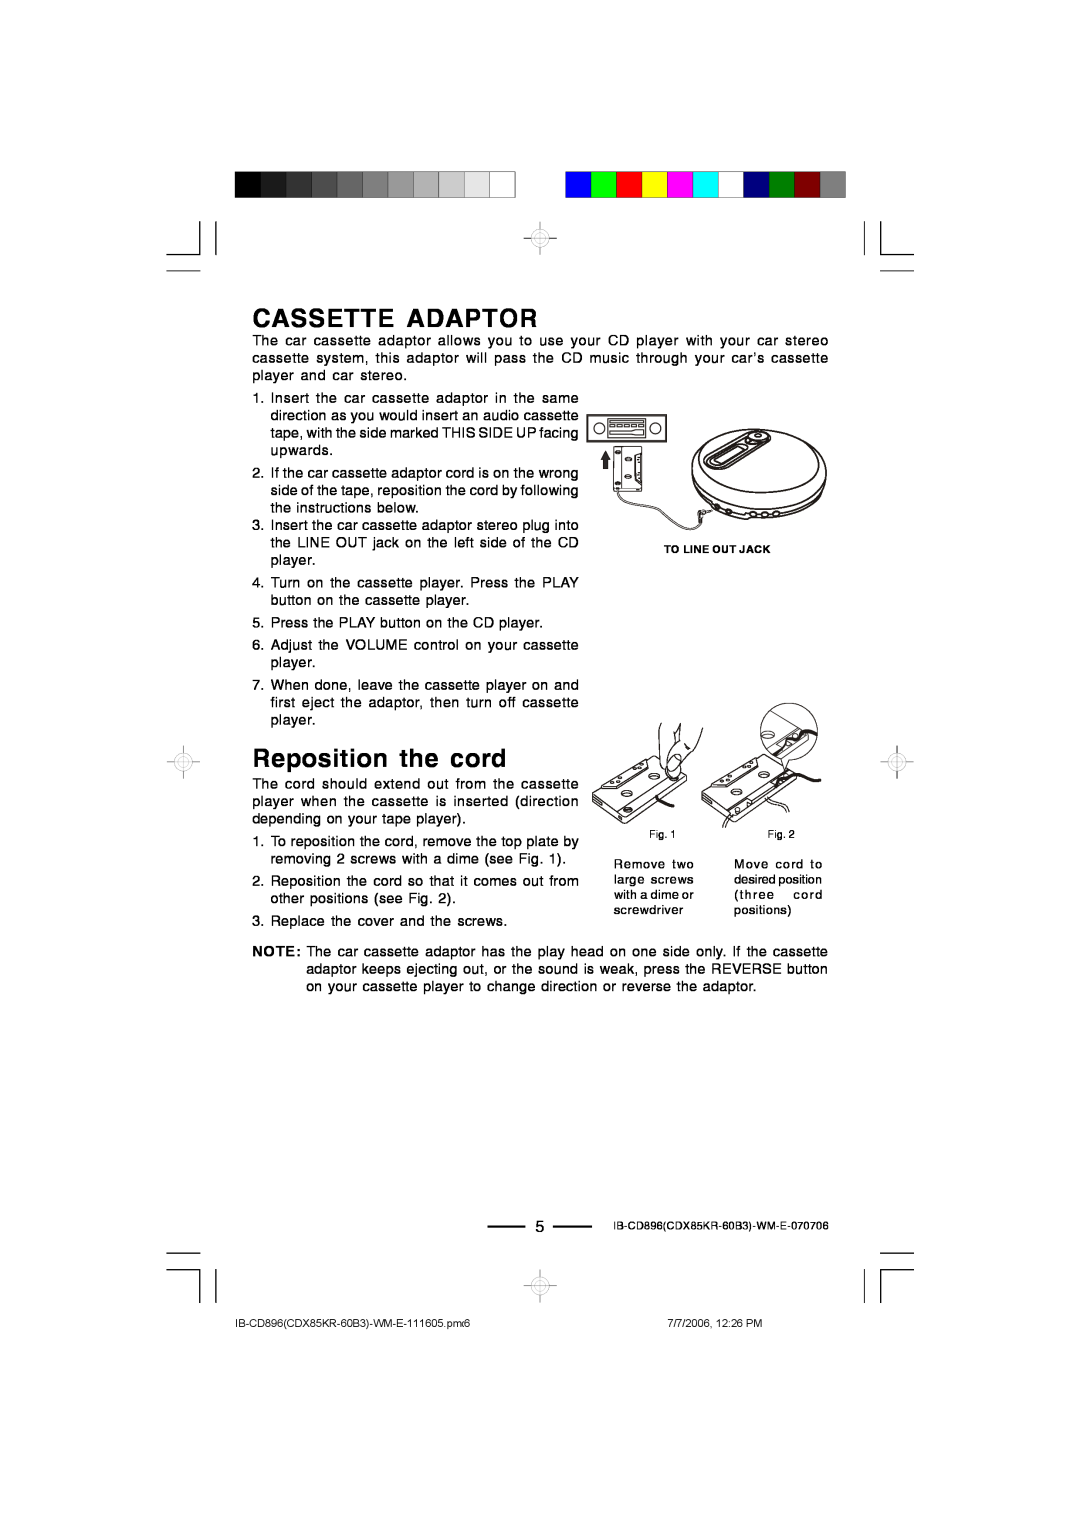 Lenoxx Electronics CD-896 operating instructions Cassette Adaptor, Reposition the cord 